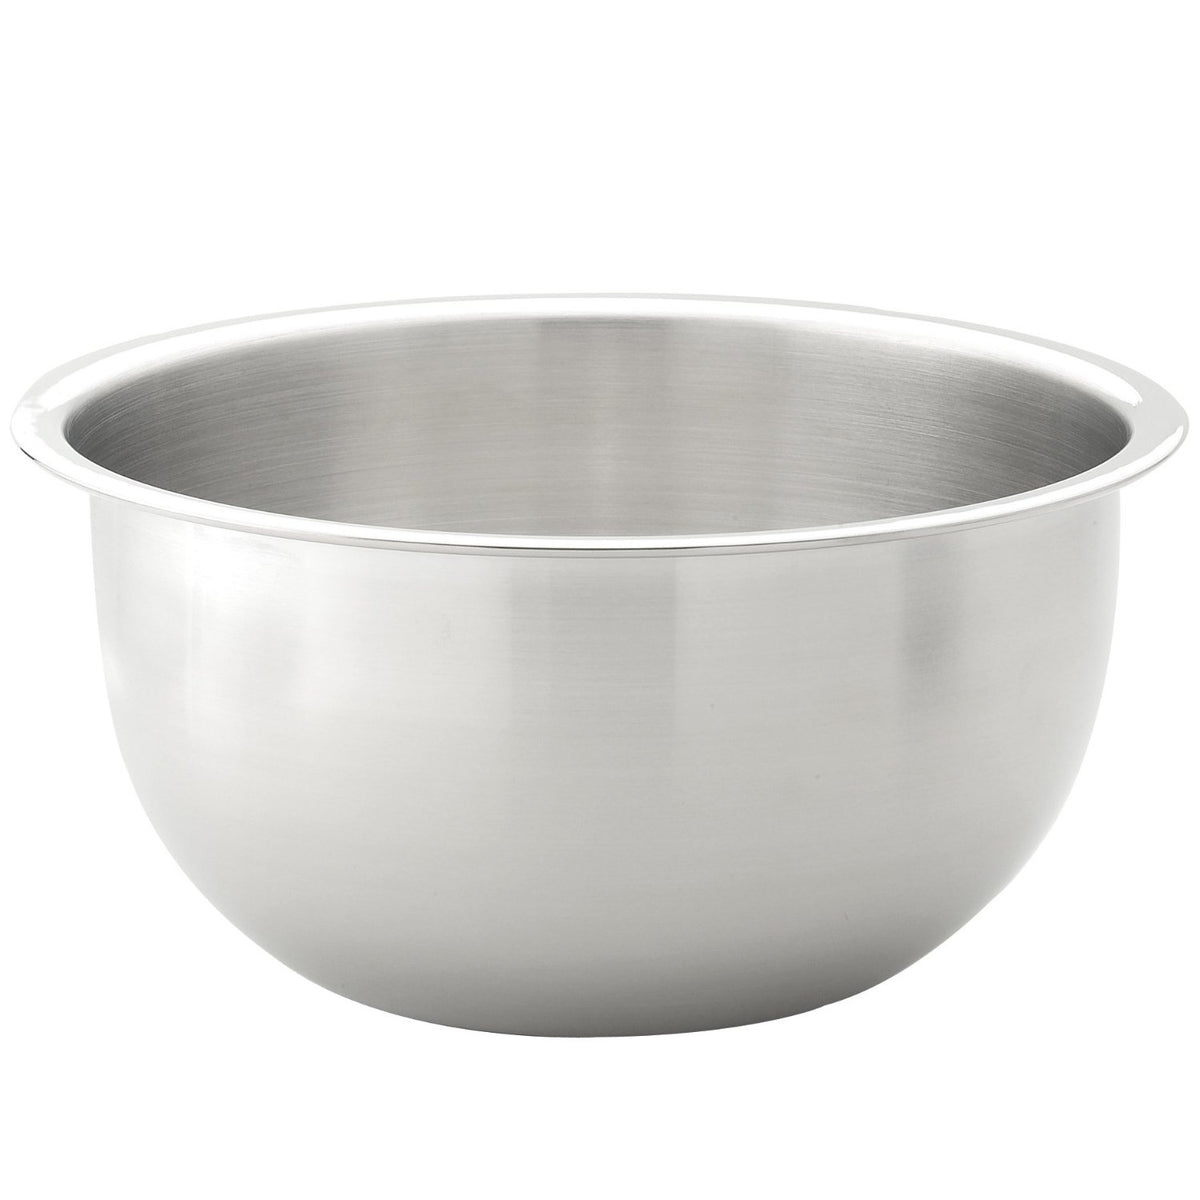 The Essentials 48003 Mixing Bowl, Stainless Steel, 6 Quarts